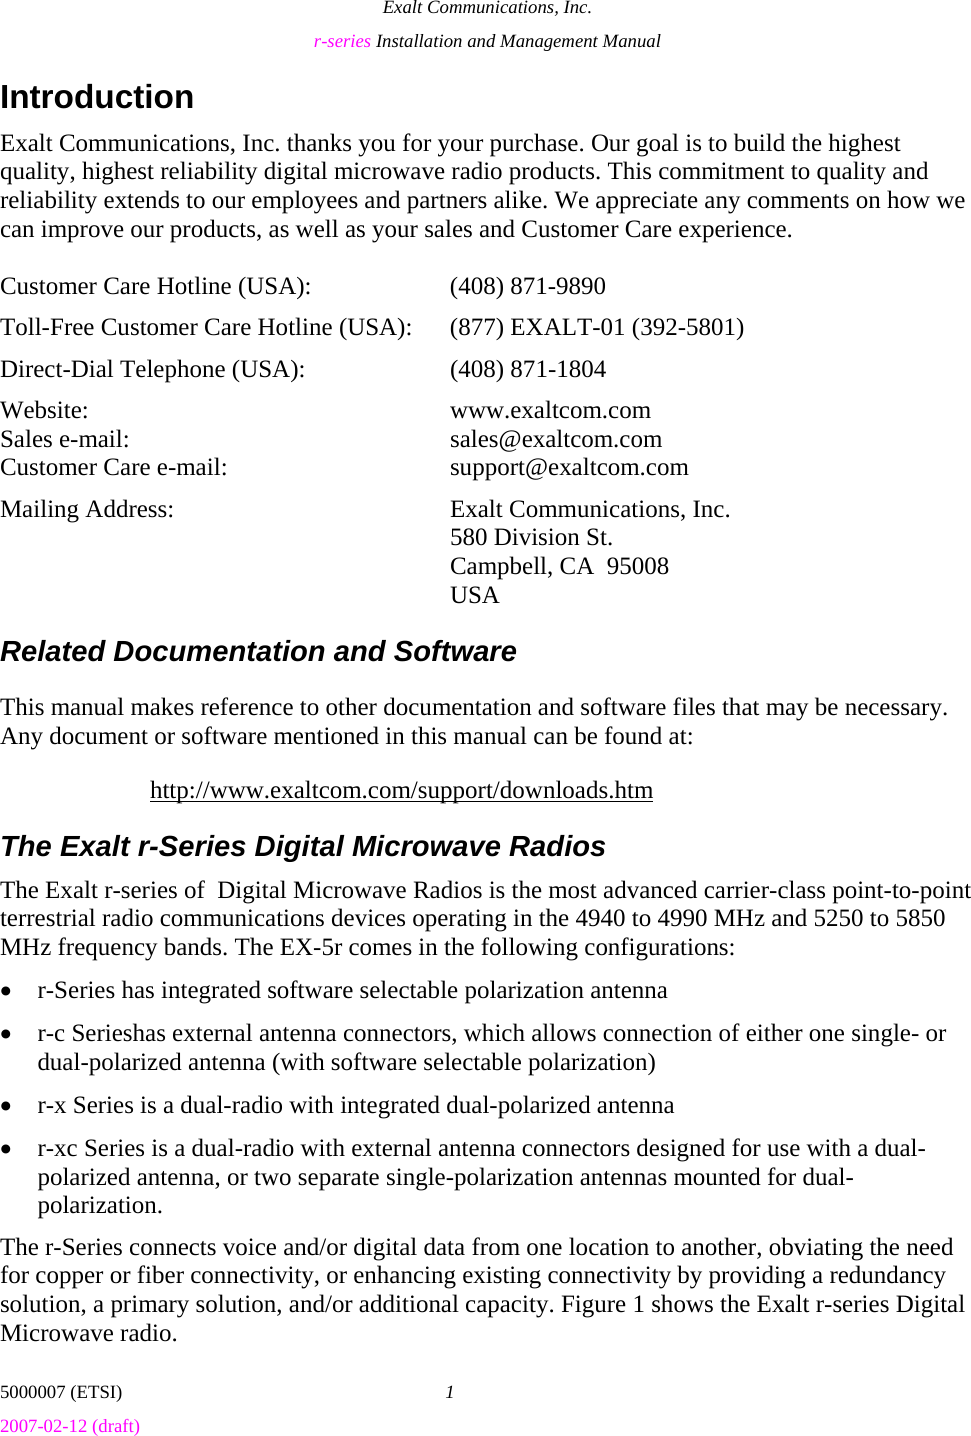 Exalt Communications, Inc. r-series Installation and Management Manual 5000007 (ETSI)  1 2007-02-12 (draft)  Introduction Exalt Communications, Inc. thanks you for your purchase. Our goal is to build the highest quality, highest reliability digital microwave radio products. This commitment to quality and reliability extends to our employees and partners alike. We appreciate any comments on how we can improve our products, as well as your sales and Customer Care experience.  Customer Care Hotline (USA):    (408) 871-9890 Toll-Free Customer Care Hotline (USA):  (877) EXALT-01 (392-5801) Direct-Dial Telephone (USA):    (408) 871-1804 Website:  www.exaltcom.com Sales e-mail:    sales@exaltcom.com Customer Care e-mail:    support@exaltcom.com Mailing Address:    Exalt Communications, Inc.     580 Division St.     Campbell, CA  95008   USA Related Documentation and Software This manual makes reference to other documentation and software files that may be necessary. Any document or software mentioned in this manual can be found at: http://www.exaltcom.com/support/downloads.htm The Exalt r-Series Digital Microwave Radios The Exalt r-series of  Digital Microwave Radios is the most advanced carrier-class point-to-point terrestrial radio communications devices operating in the 4940 to 4990 MHz and 5250 to 5850 MHz frequency bands. The EX-5r comes in the following configurations: • r-Series has integrated software selectable polarization antenna • r-c Serieshas external antenna connectors, which allows connection of either one single- or dual-polarized antenna (with software selectable polarization) • r-x Series is a dual-radio with integrated dual-polarized antenna • r-xc Series is a dual-radio with external antenna connectors designed for use with a dual-polarized antenna, or two separate single-polarization antennas mounted for dual-polarization. The r-Series connects voice and/or digital data from one location to another, obviating the need for copper or fiber connectivity, or enhancing existing connectivity by providing a redundancy solution, a primary solution, and/or additional capacity. Figure 1 shows the Exalt r-series Digital Microwave radio. 